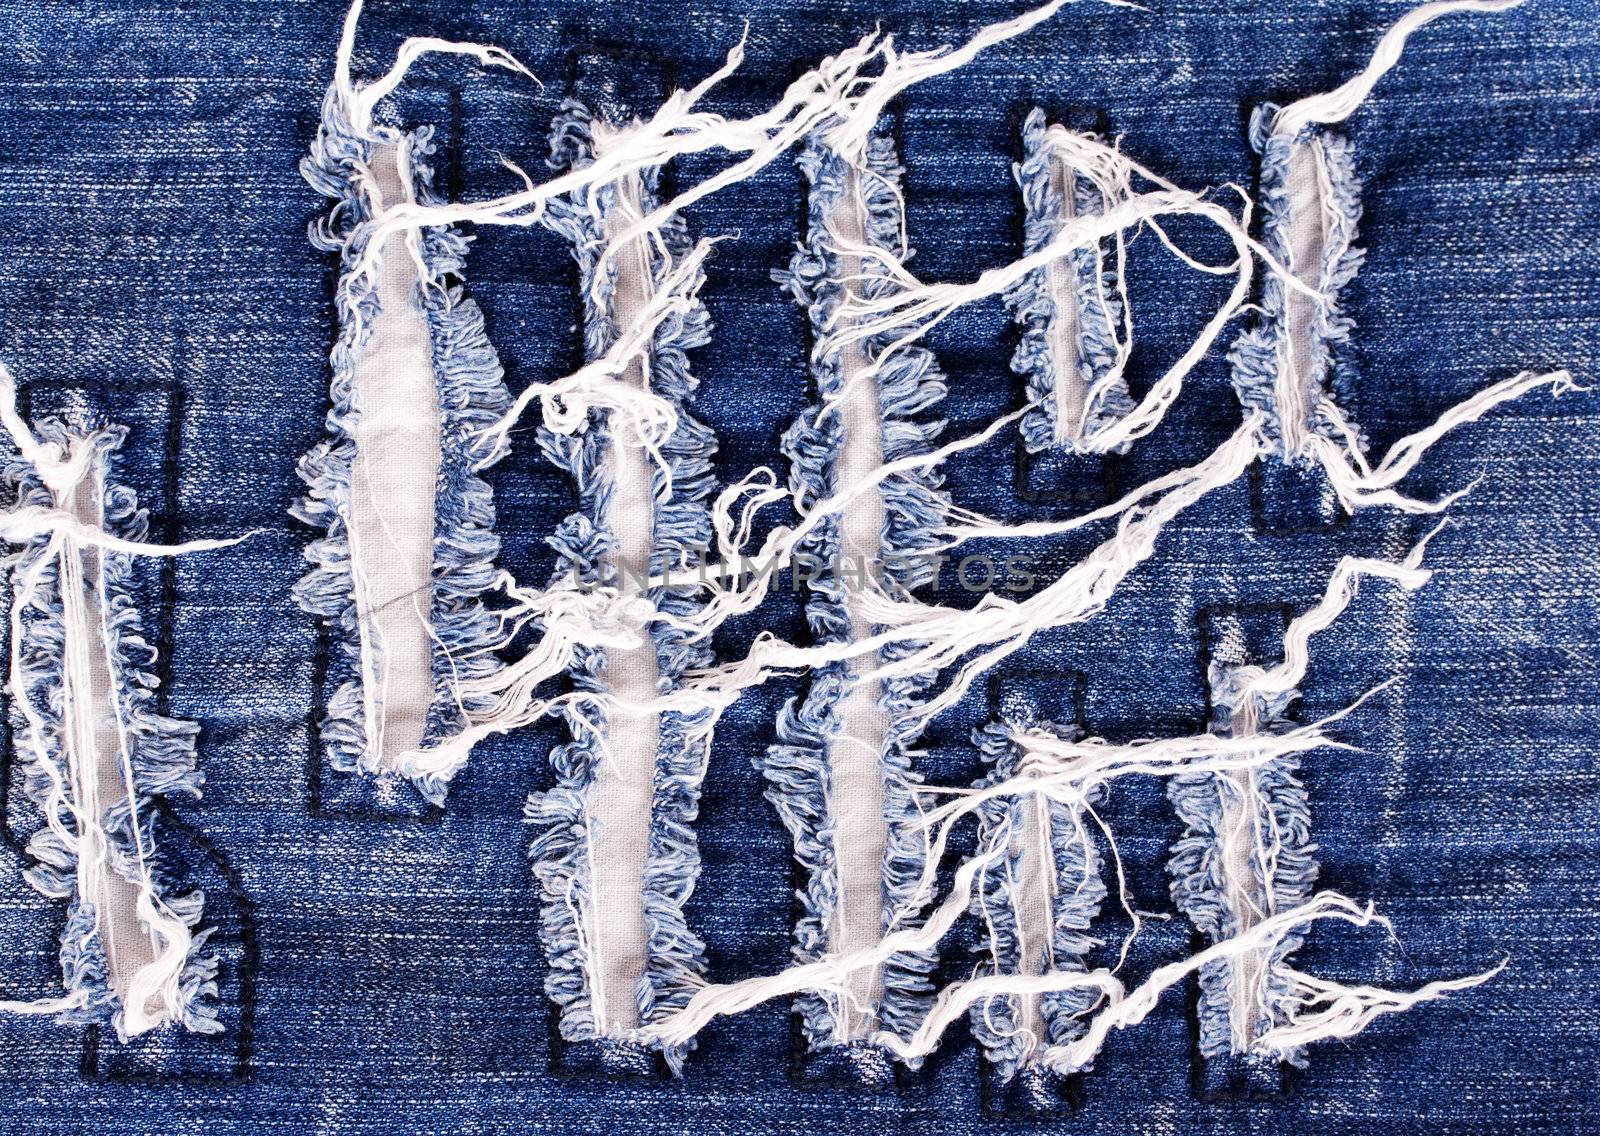 Creative embroidery on jeans, denim background